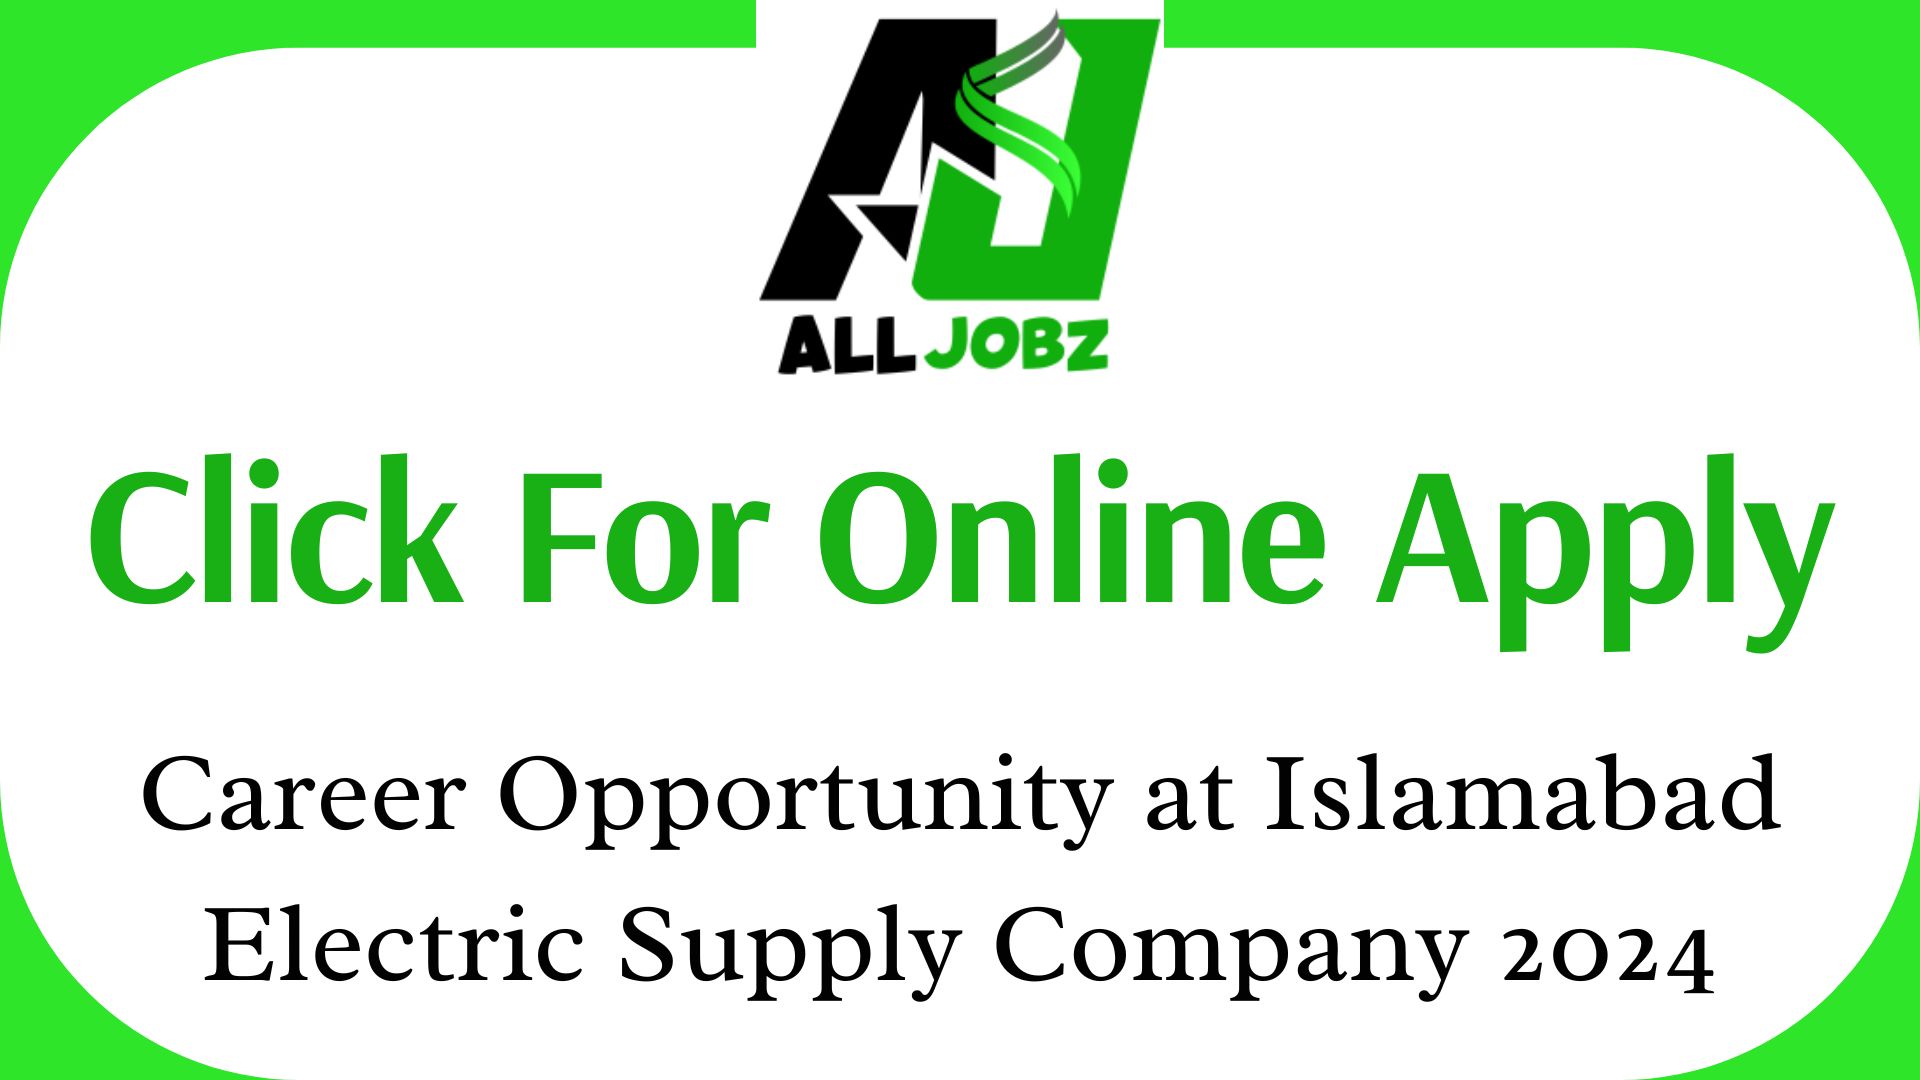 Career Opportunity At Islamabad Electric Supply Company 2024 Last Date, Career Opportunity At Islamabad Electric Supply Company 2024 Karachi, Career Opportunity At Islamabad Electric Supply Company 2024 Apply Online, Career Opportunity At Islamabad Electric Supply Company 2024 For Female, Career Opportunity At Islamabad Electric Supply,